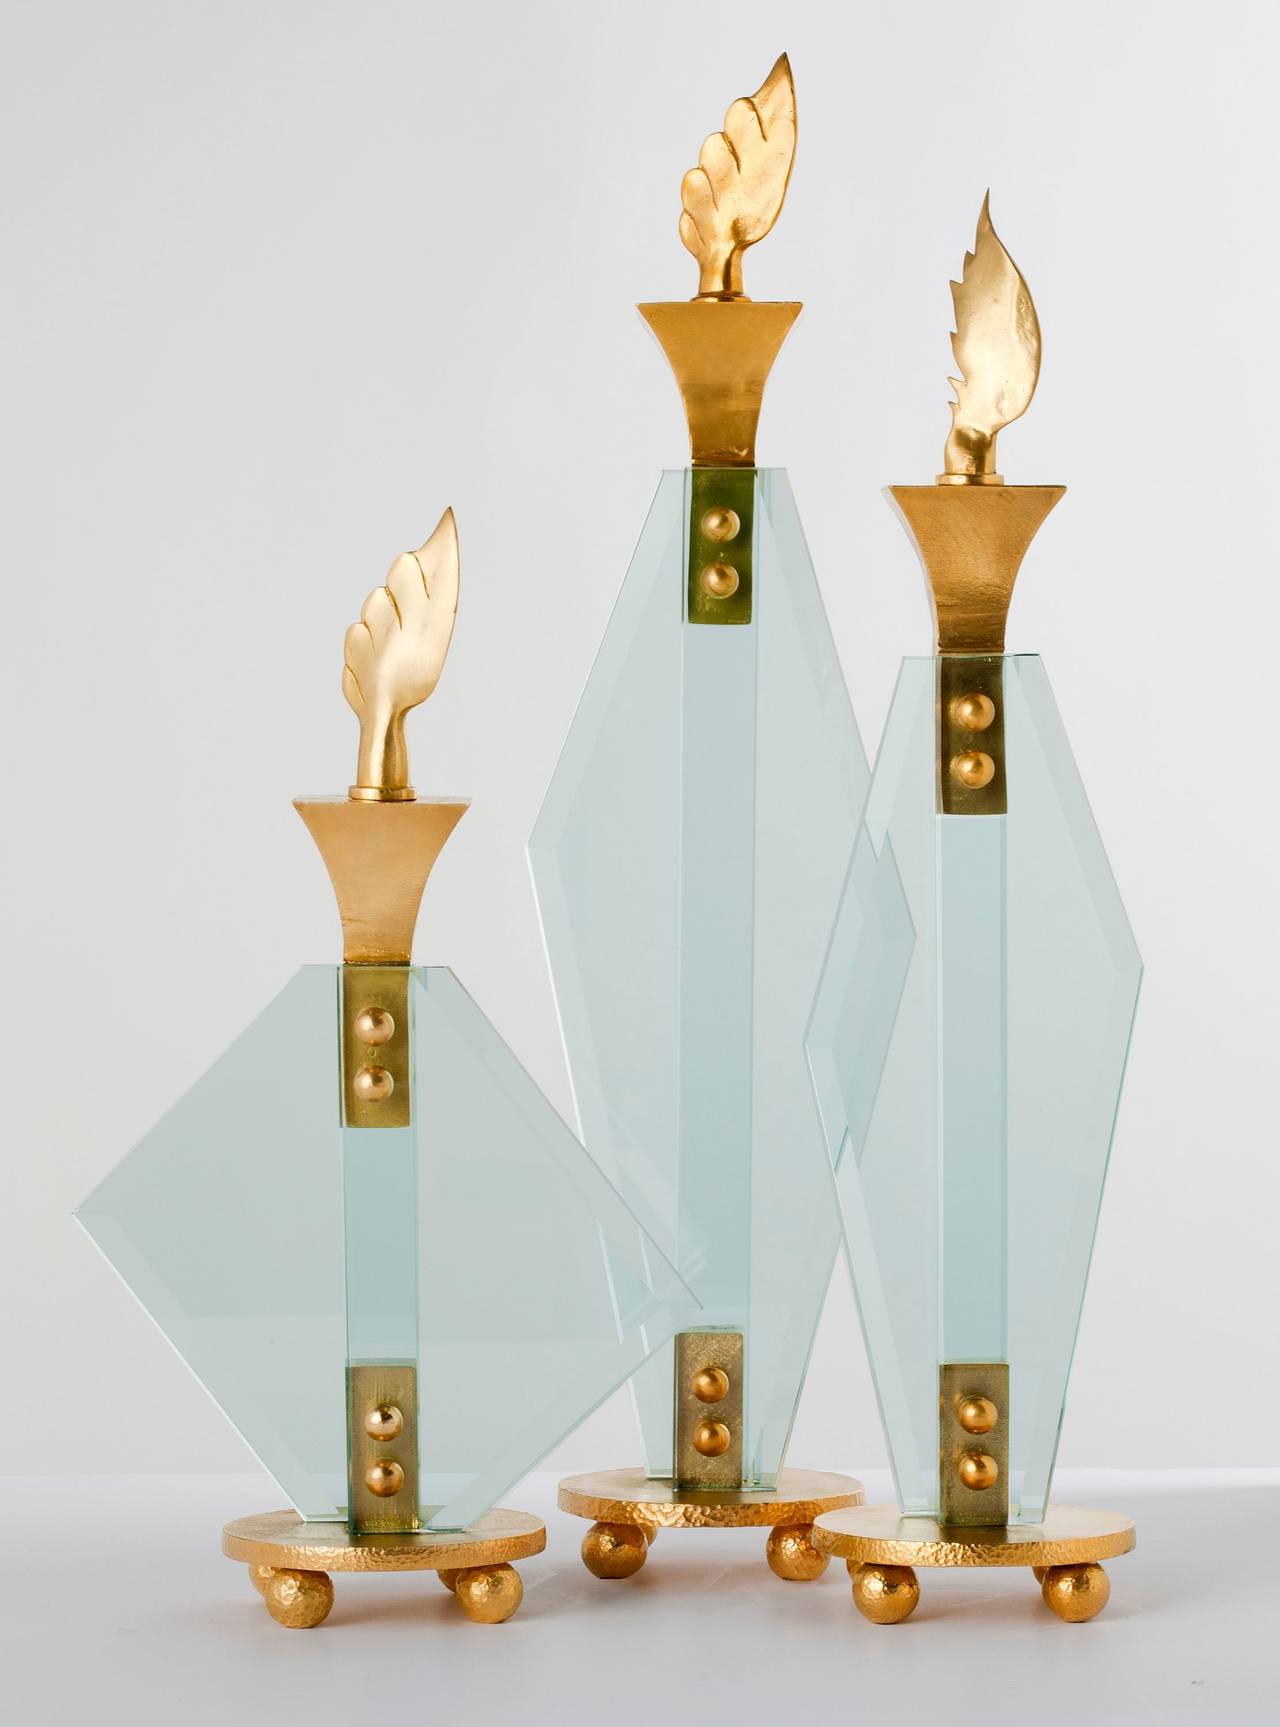 Gilt bronze and glass candlesticks with removable decorative flame finials, by Aldus. Each size is an edition of 100.

Small: Height: 11.5